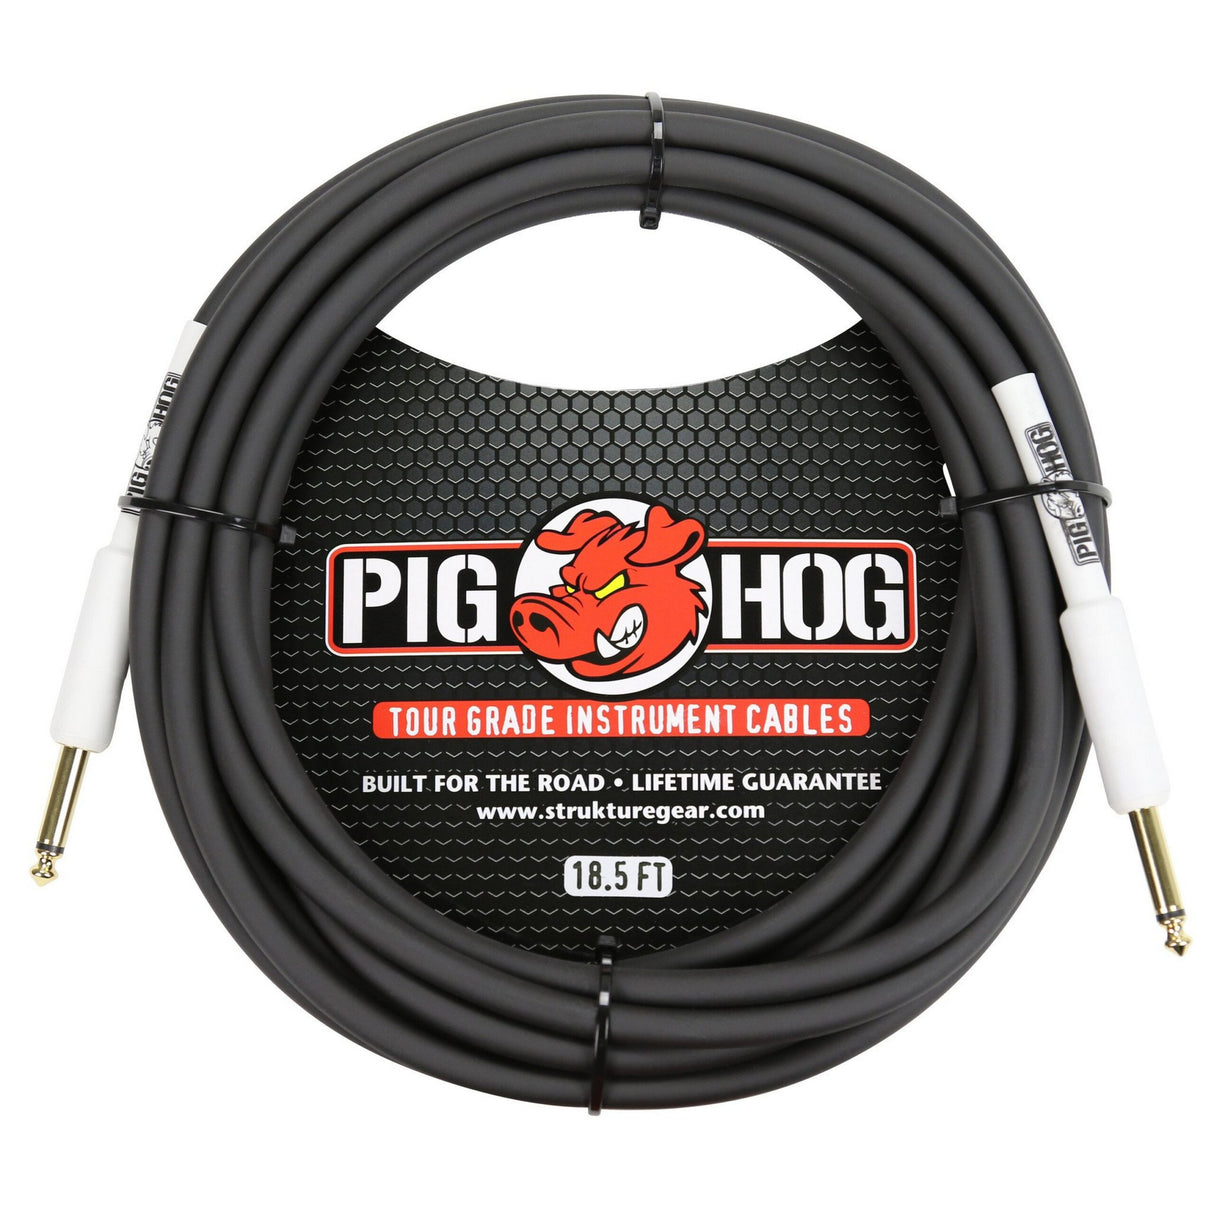 Pig Hog PH186 18.5ft 1/4-Inch to 1/4-Inch 8mm Instrument Cable